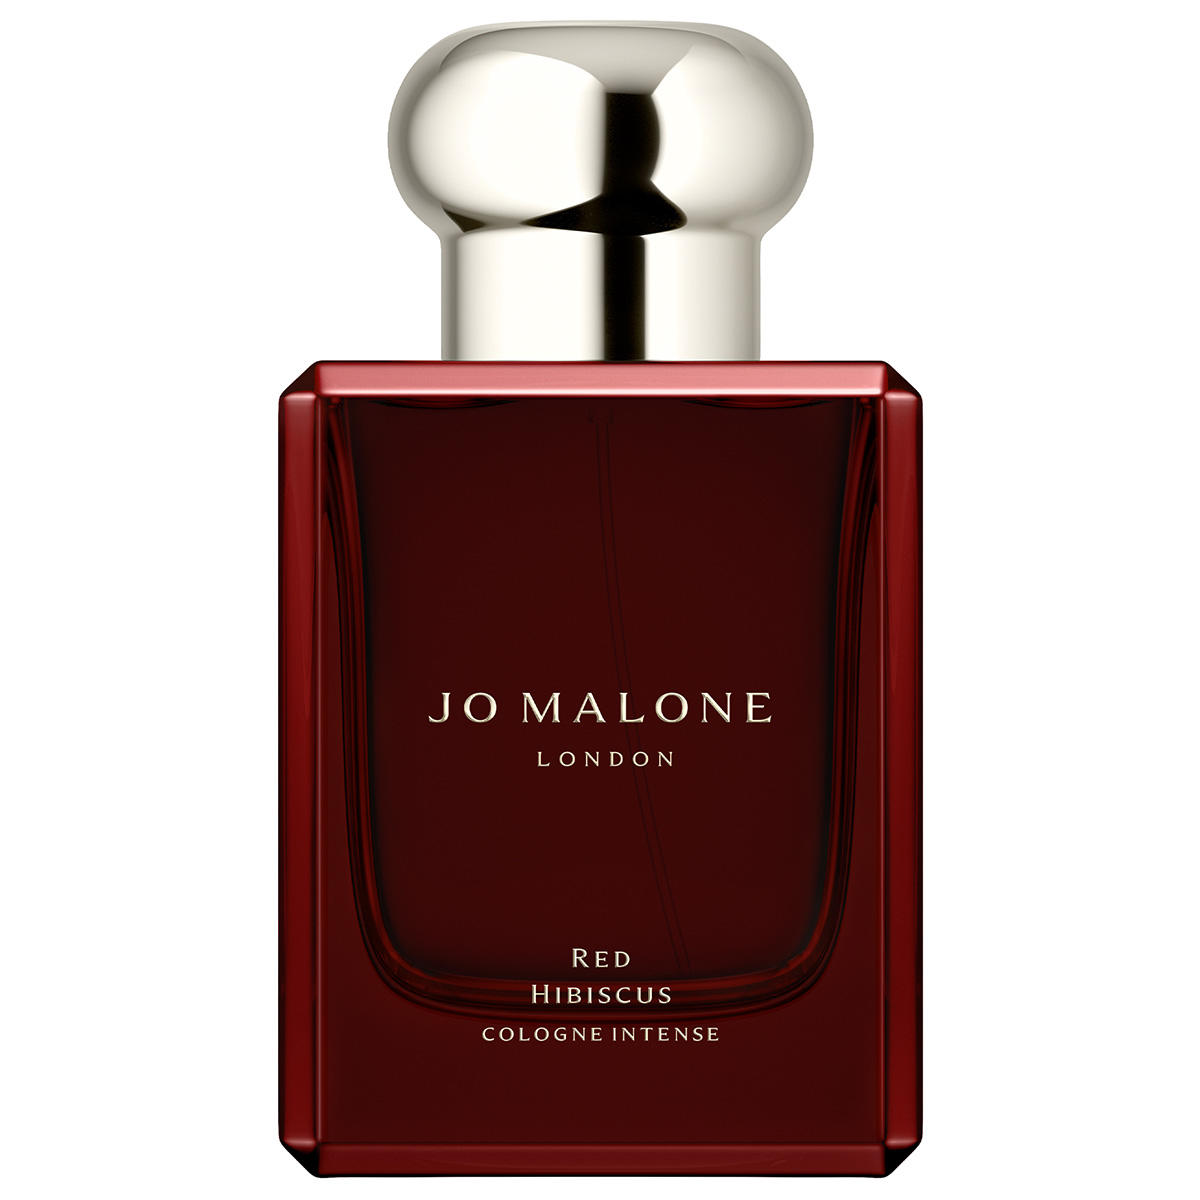 JO MALONE LONDON Red Hibiscus Cologne Intense  - 1